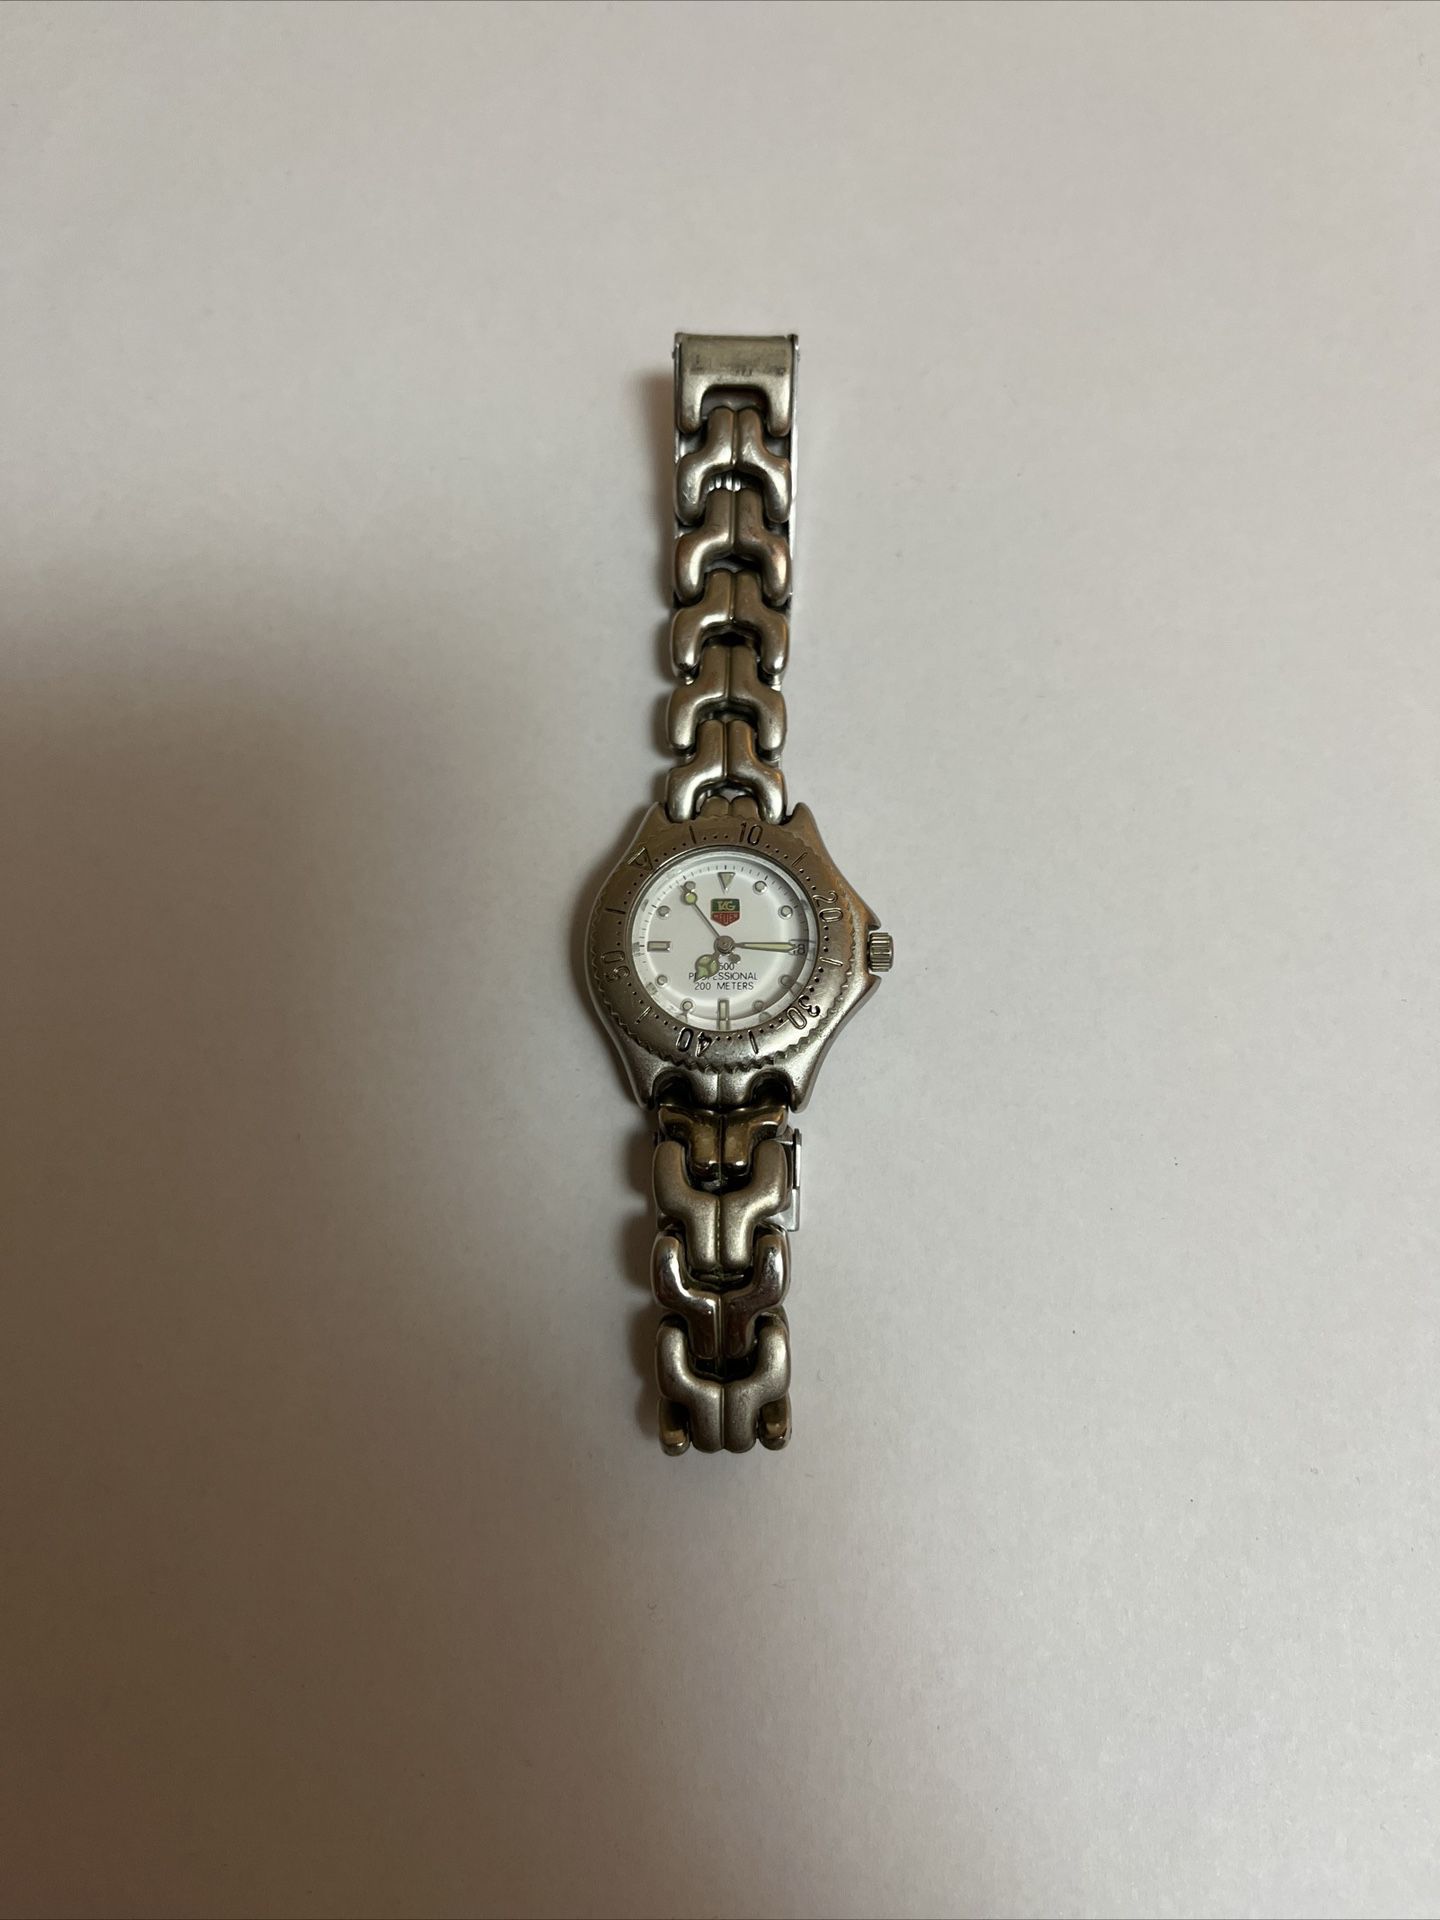 Tag Heuer Cell Professional Woman’s Quartz Watch White Dial S99 008 Working